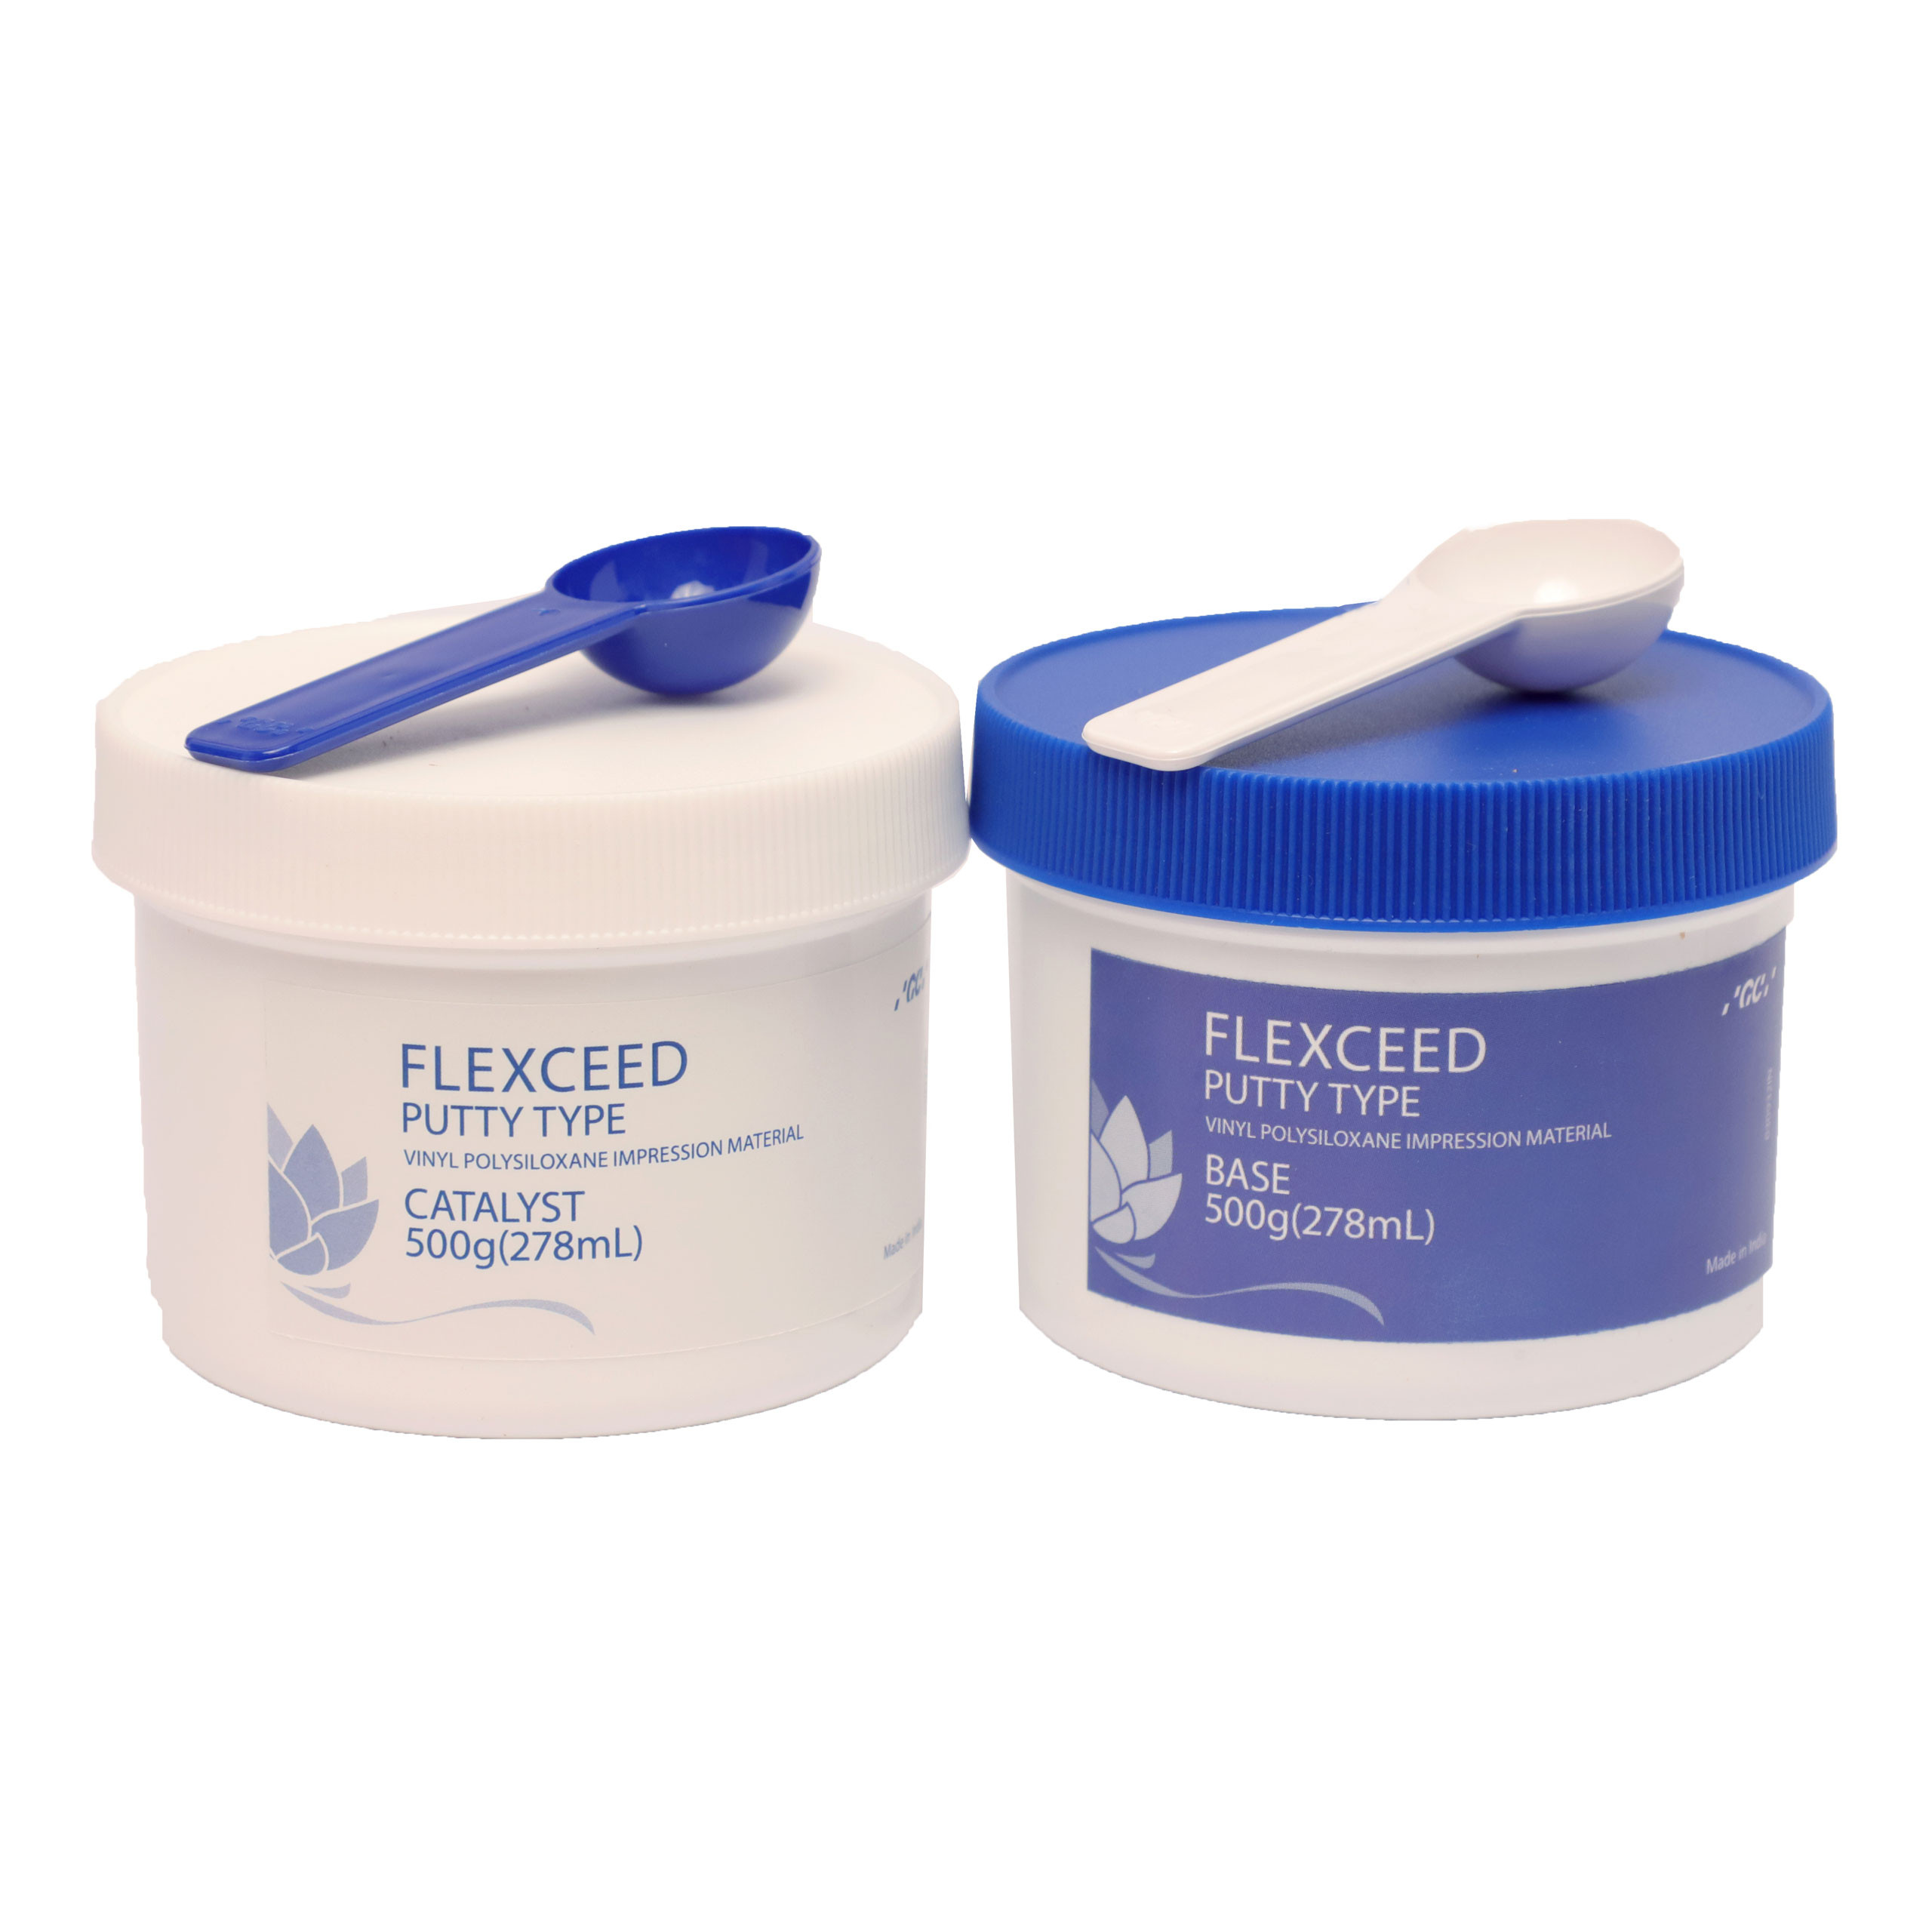 GC Flexceed Putty (Vinyl Polysiloxane Impression Material ; Type 0: Putty Consistency)